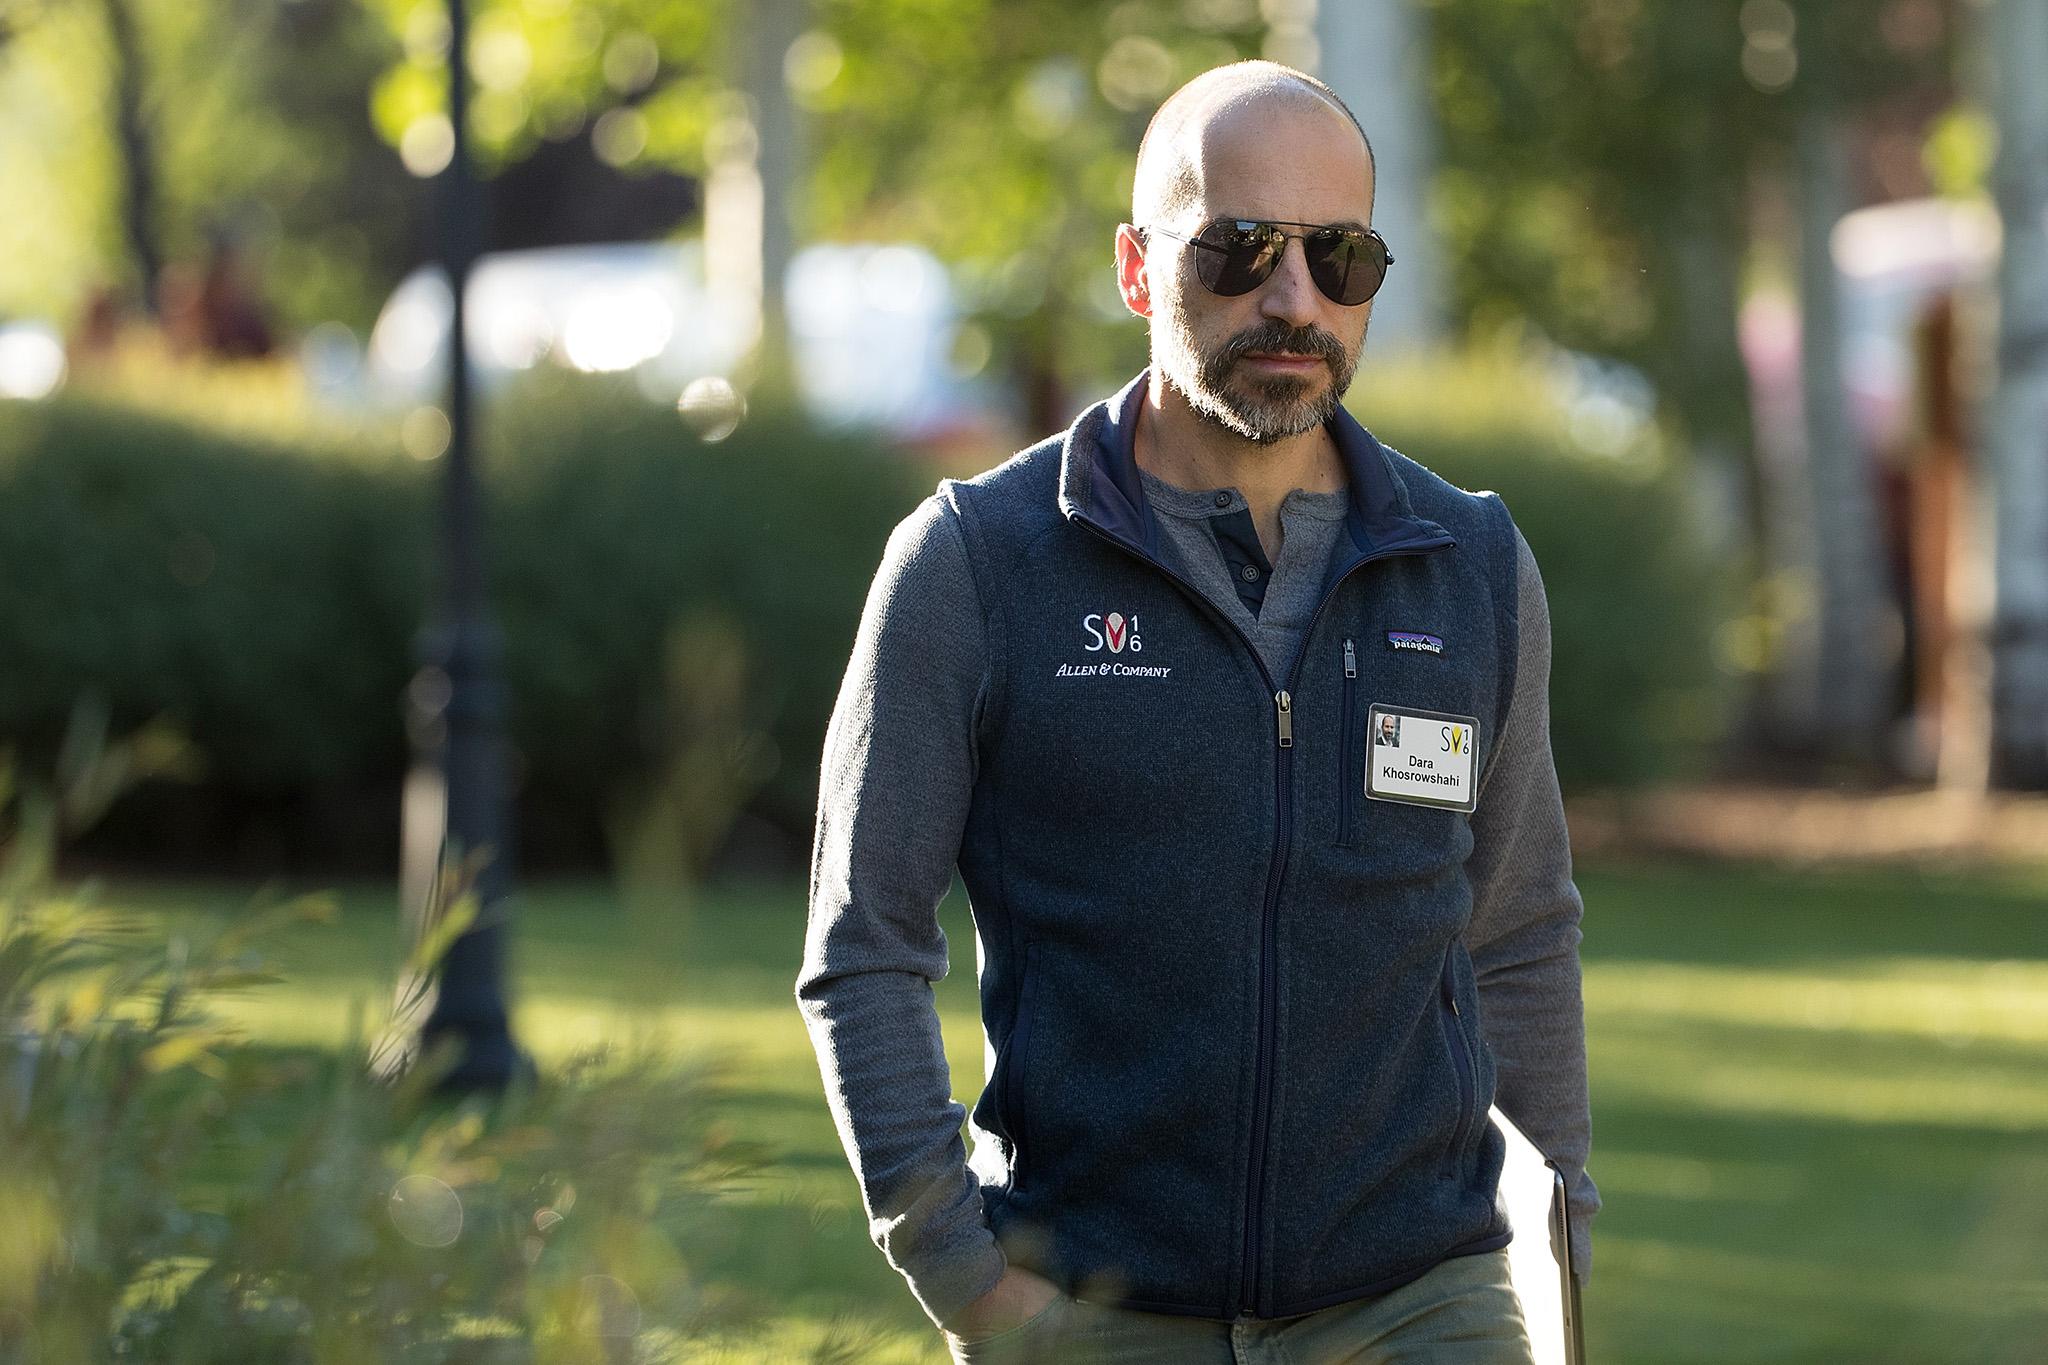 New Uber chief executive Dara Khosrowshahi must build trust with his new employees after previous boss Travis Kalanick refused concessions